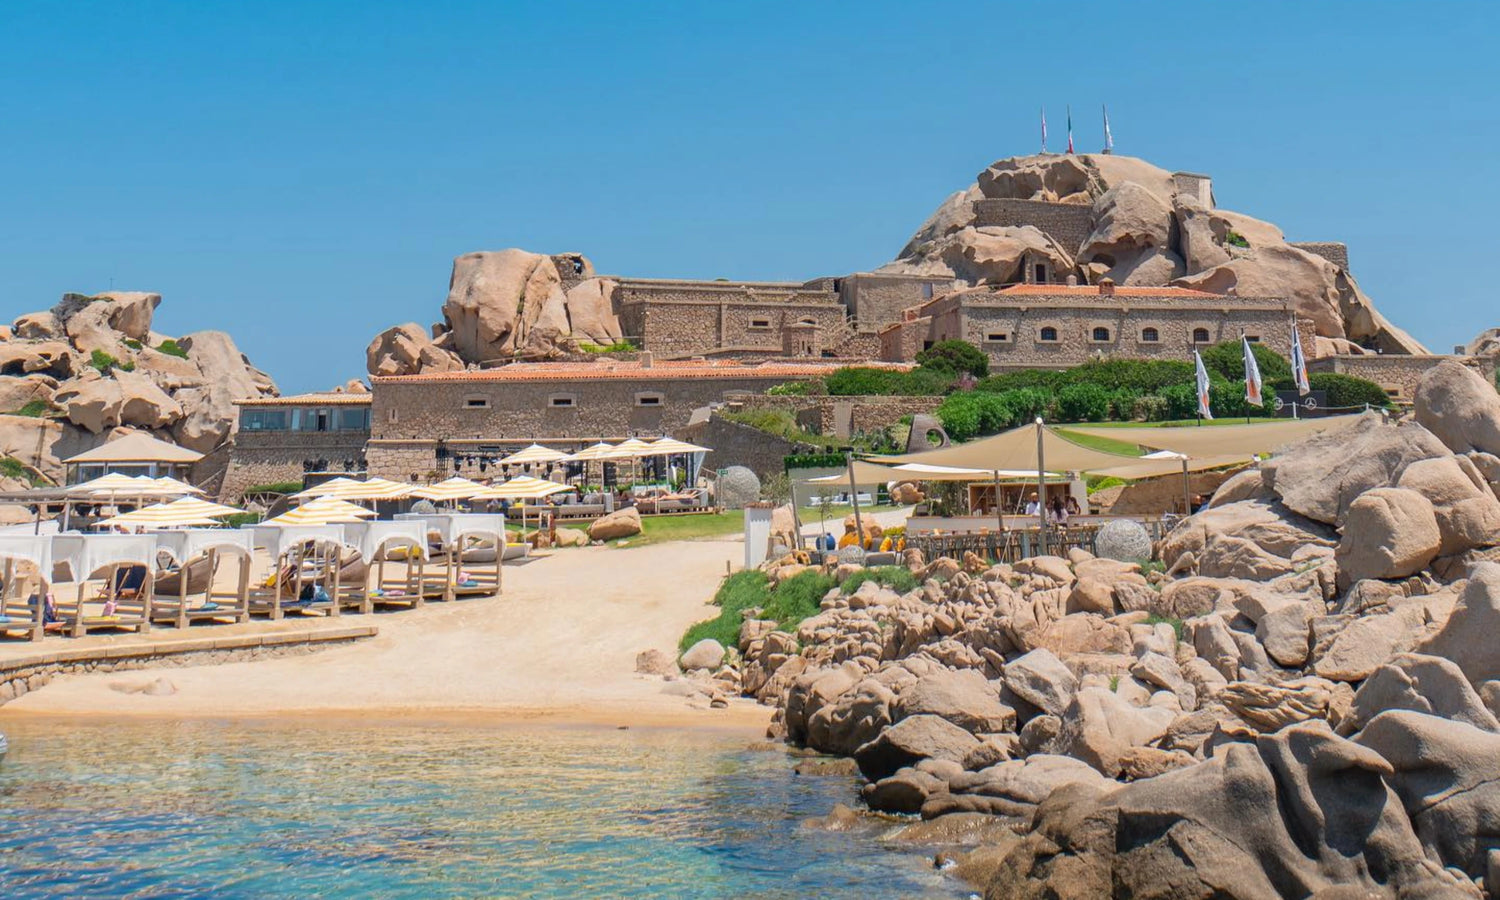 Cala di Volpe: The Stunning Bay of Costa Smeralda. Tips from Phi Beach